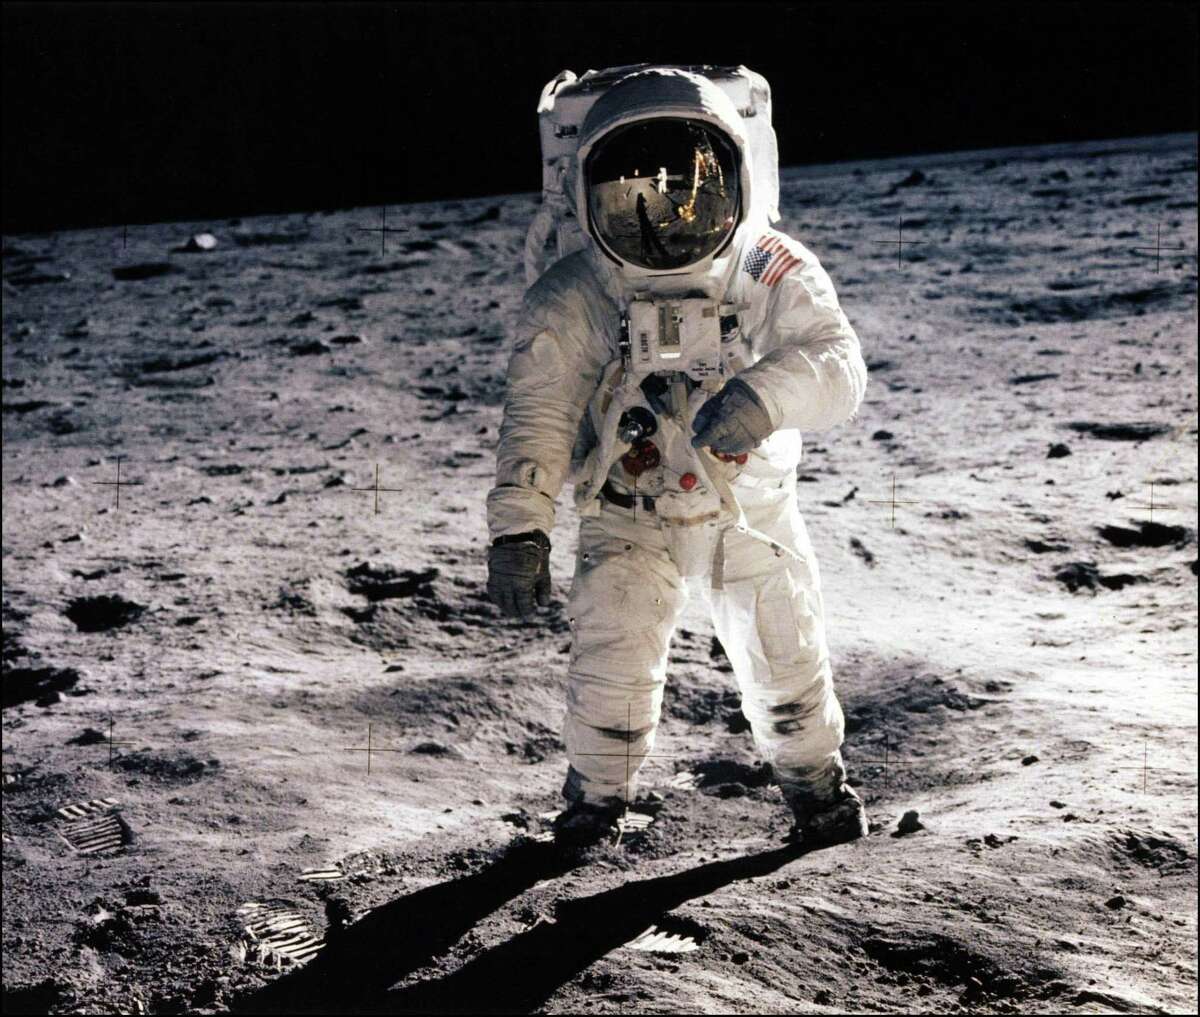 This July 20, 1969, photo shows astronaut Edwin E. Aldrin Jr. walking on the surface of the moon near the leg of the Lunar Module (ML) "Eagle" during the Apollo 11 extravehicular activity (EVA). AFP PHOTO / NASA/HANDOUT